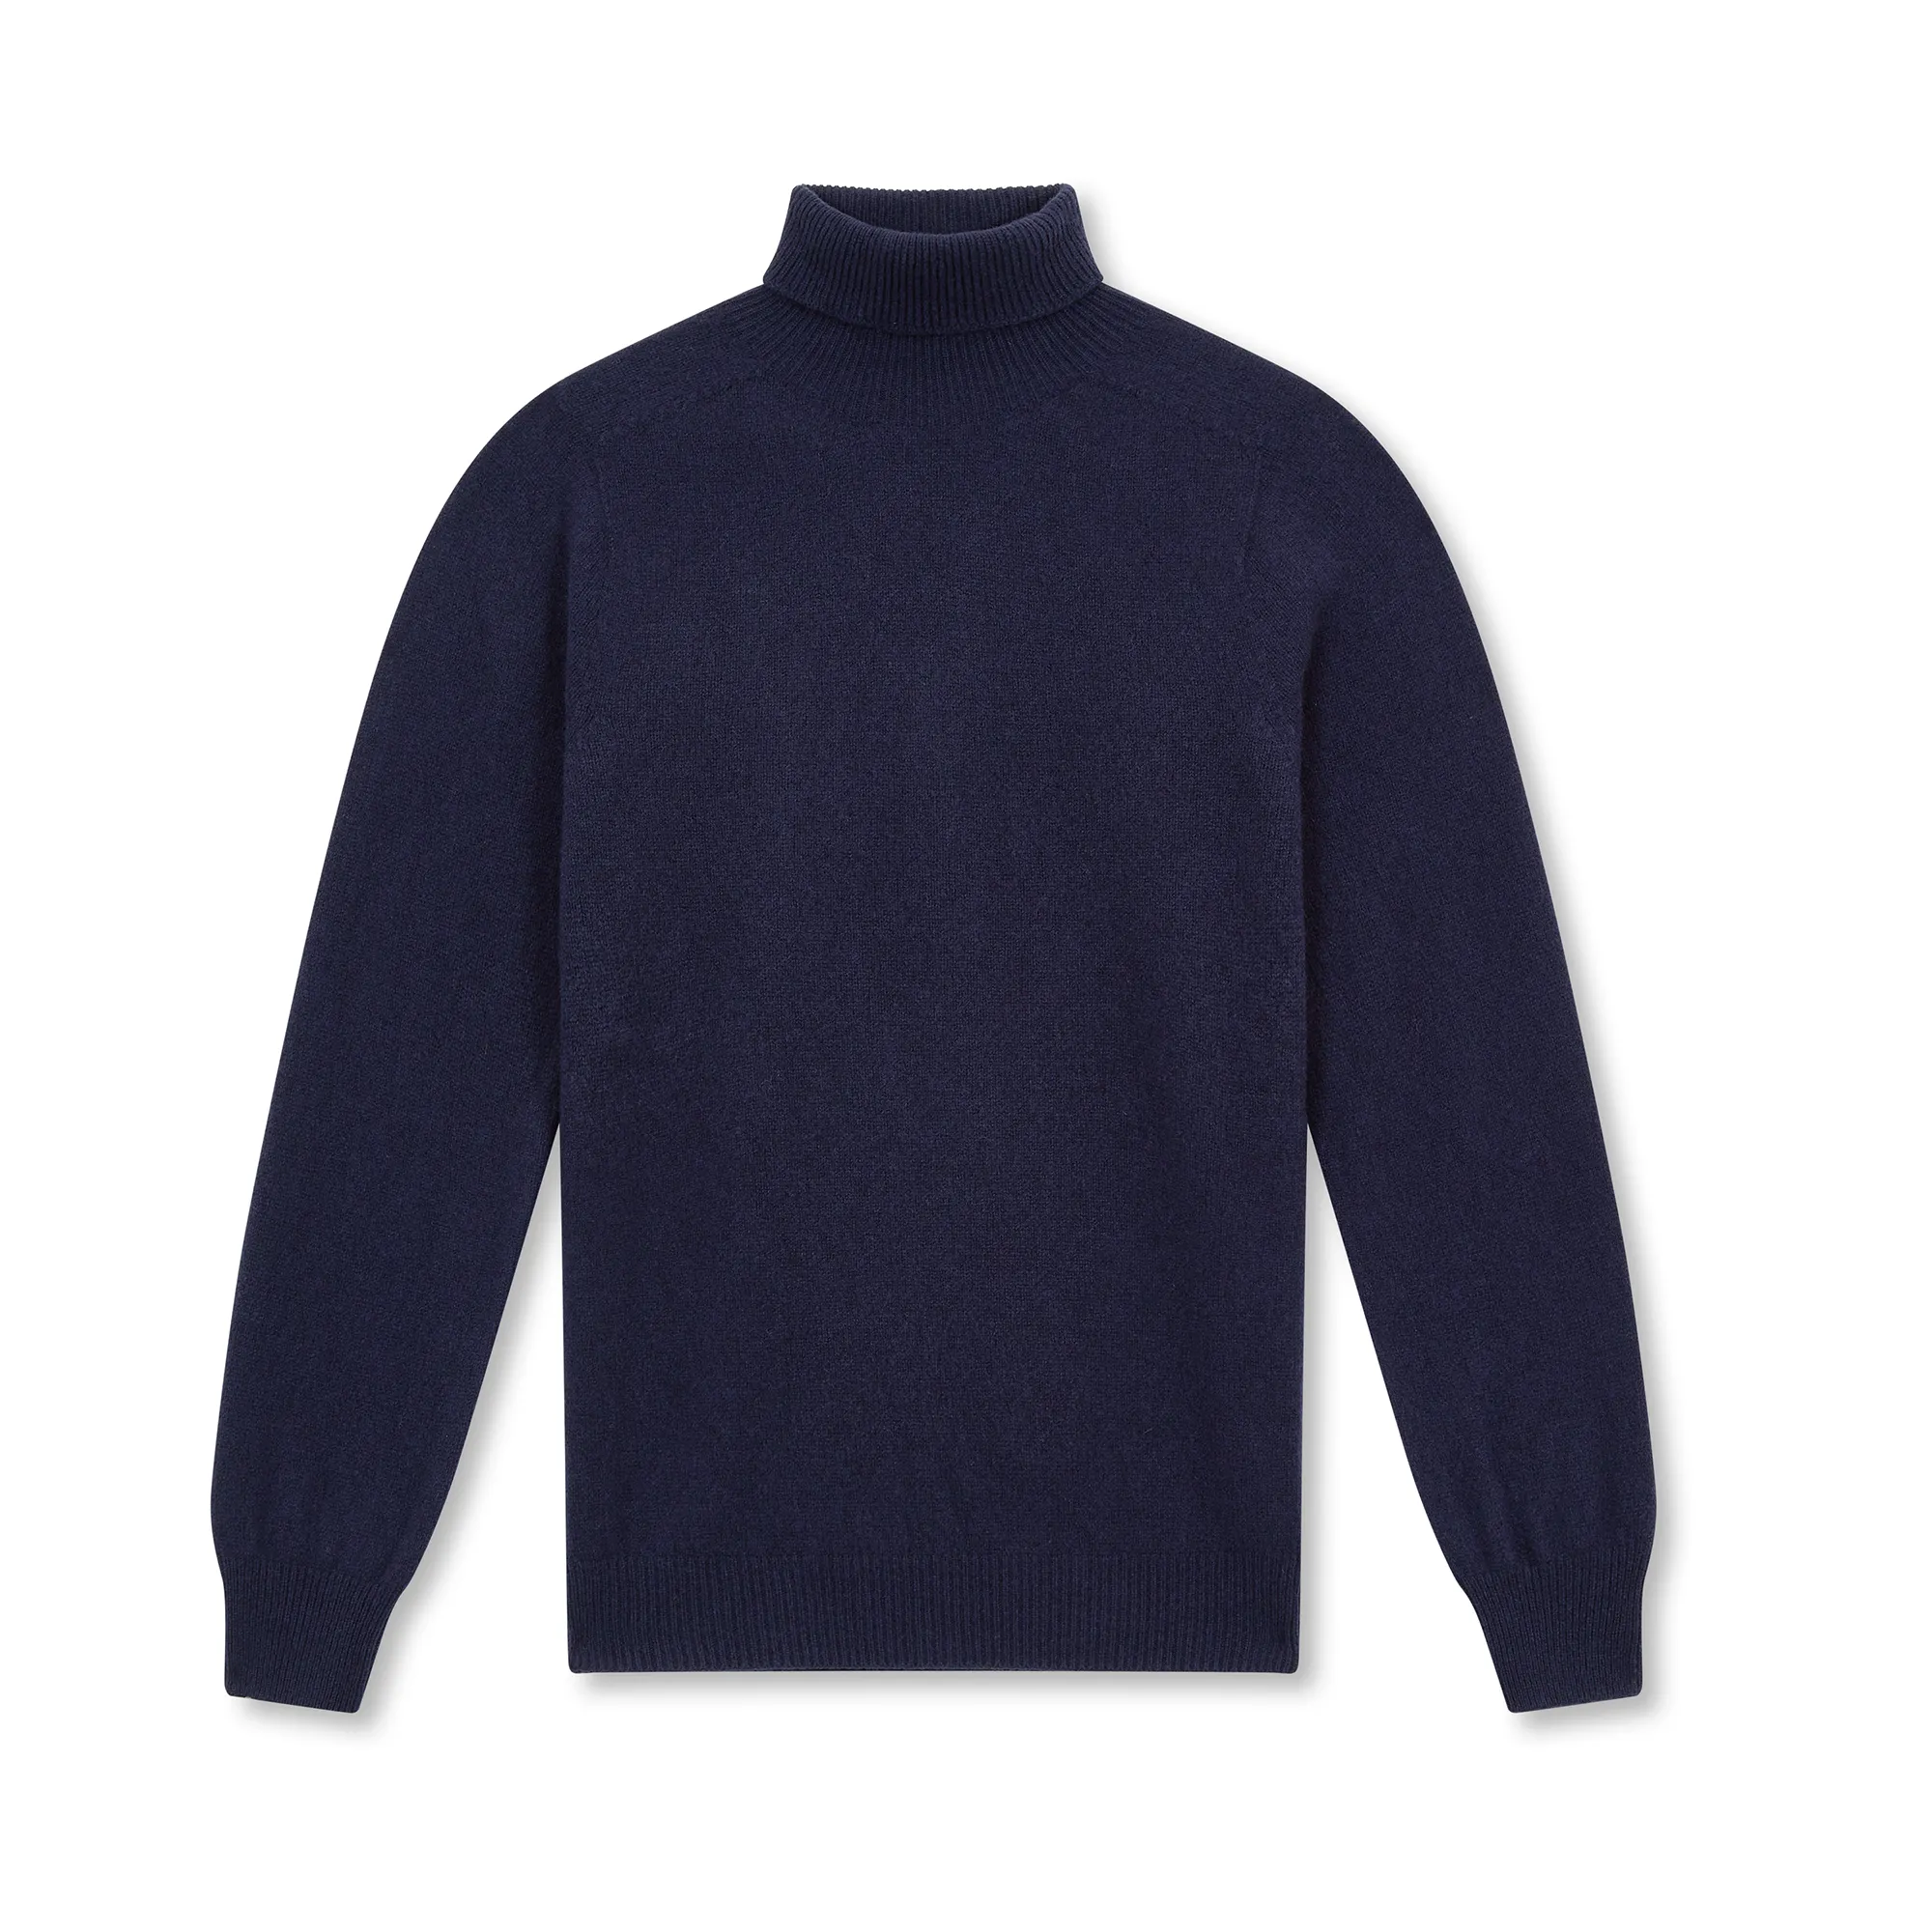 Navy Merino Wool and Cashmere Roll Neck Jumper